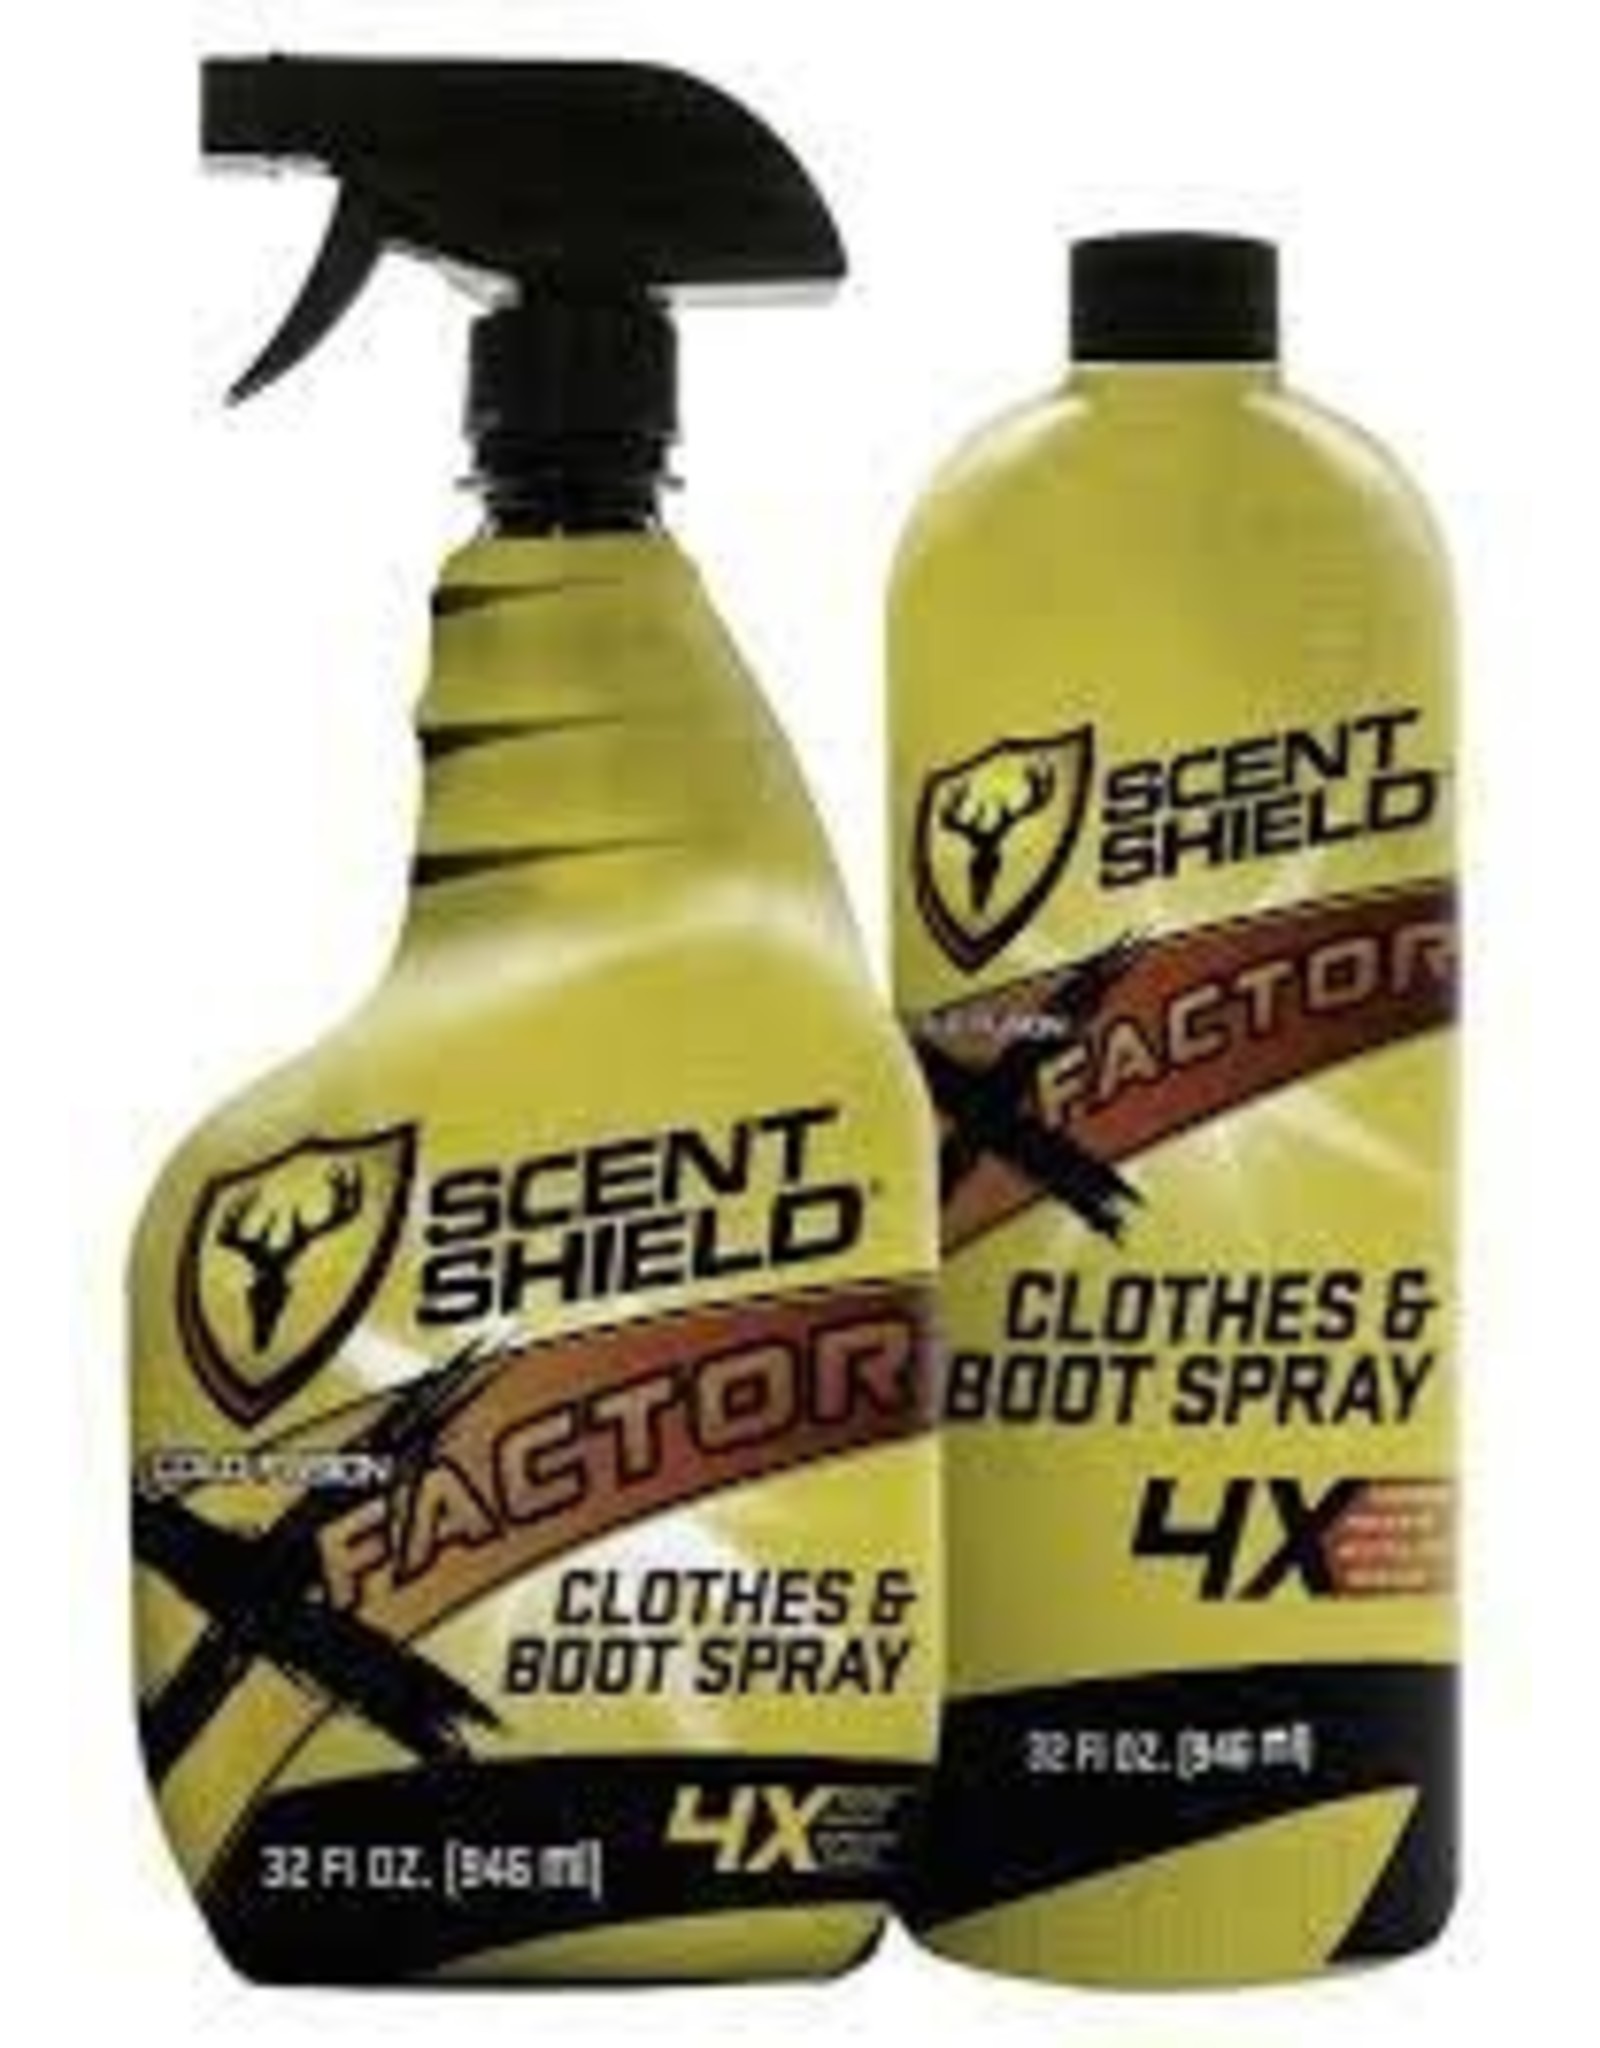 Scent Shield - Cold Fusion X-Factor 64oz Combo Pack 64oz